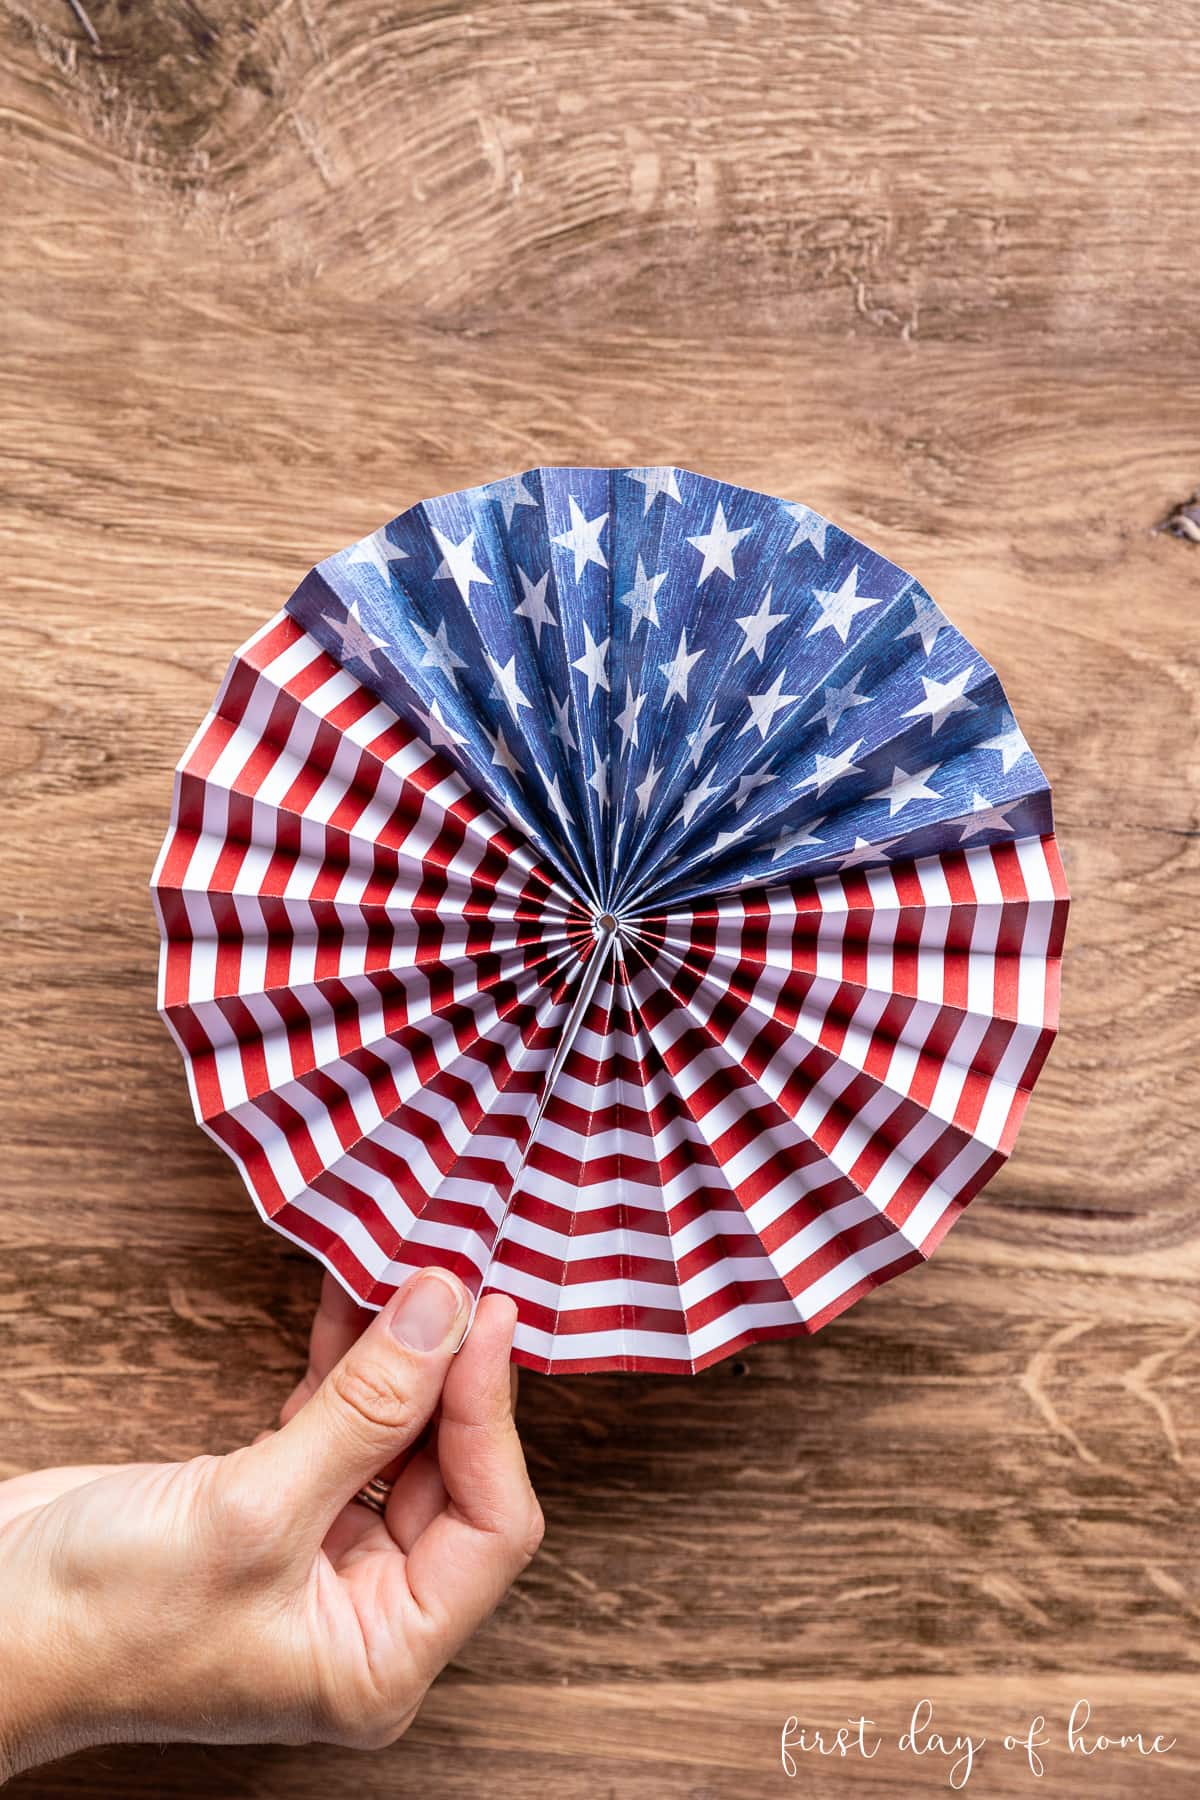 Patriotic paper fan with stars and stripes pattern